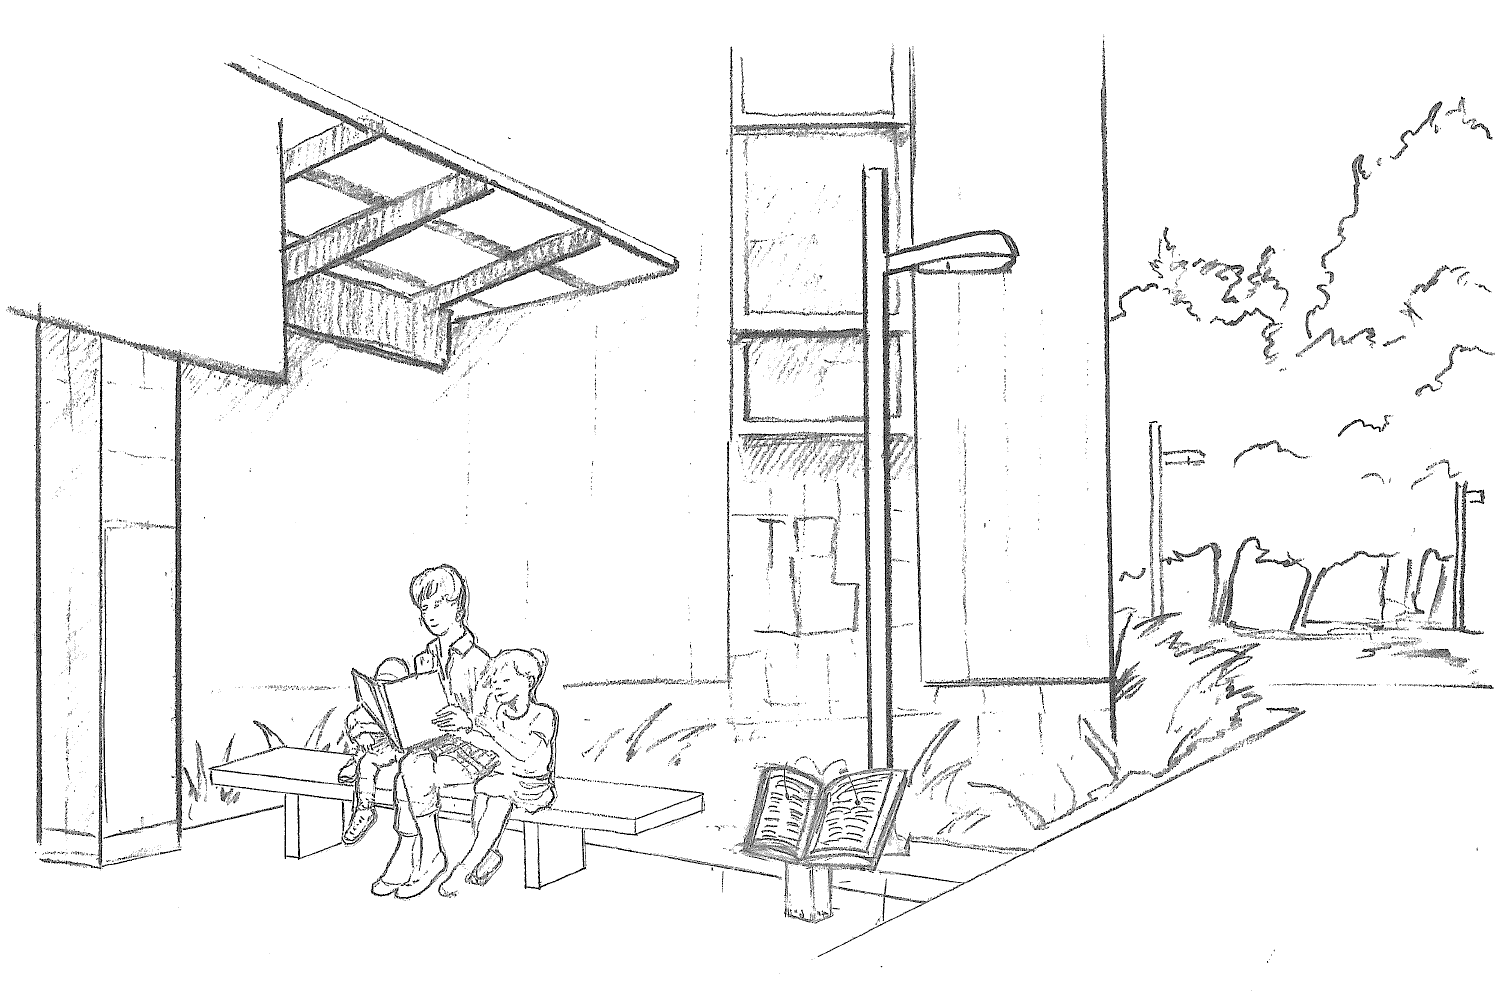 Sketch of Pat Dando Plaza with Statue and Plaque